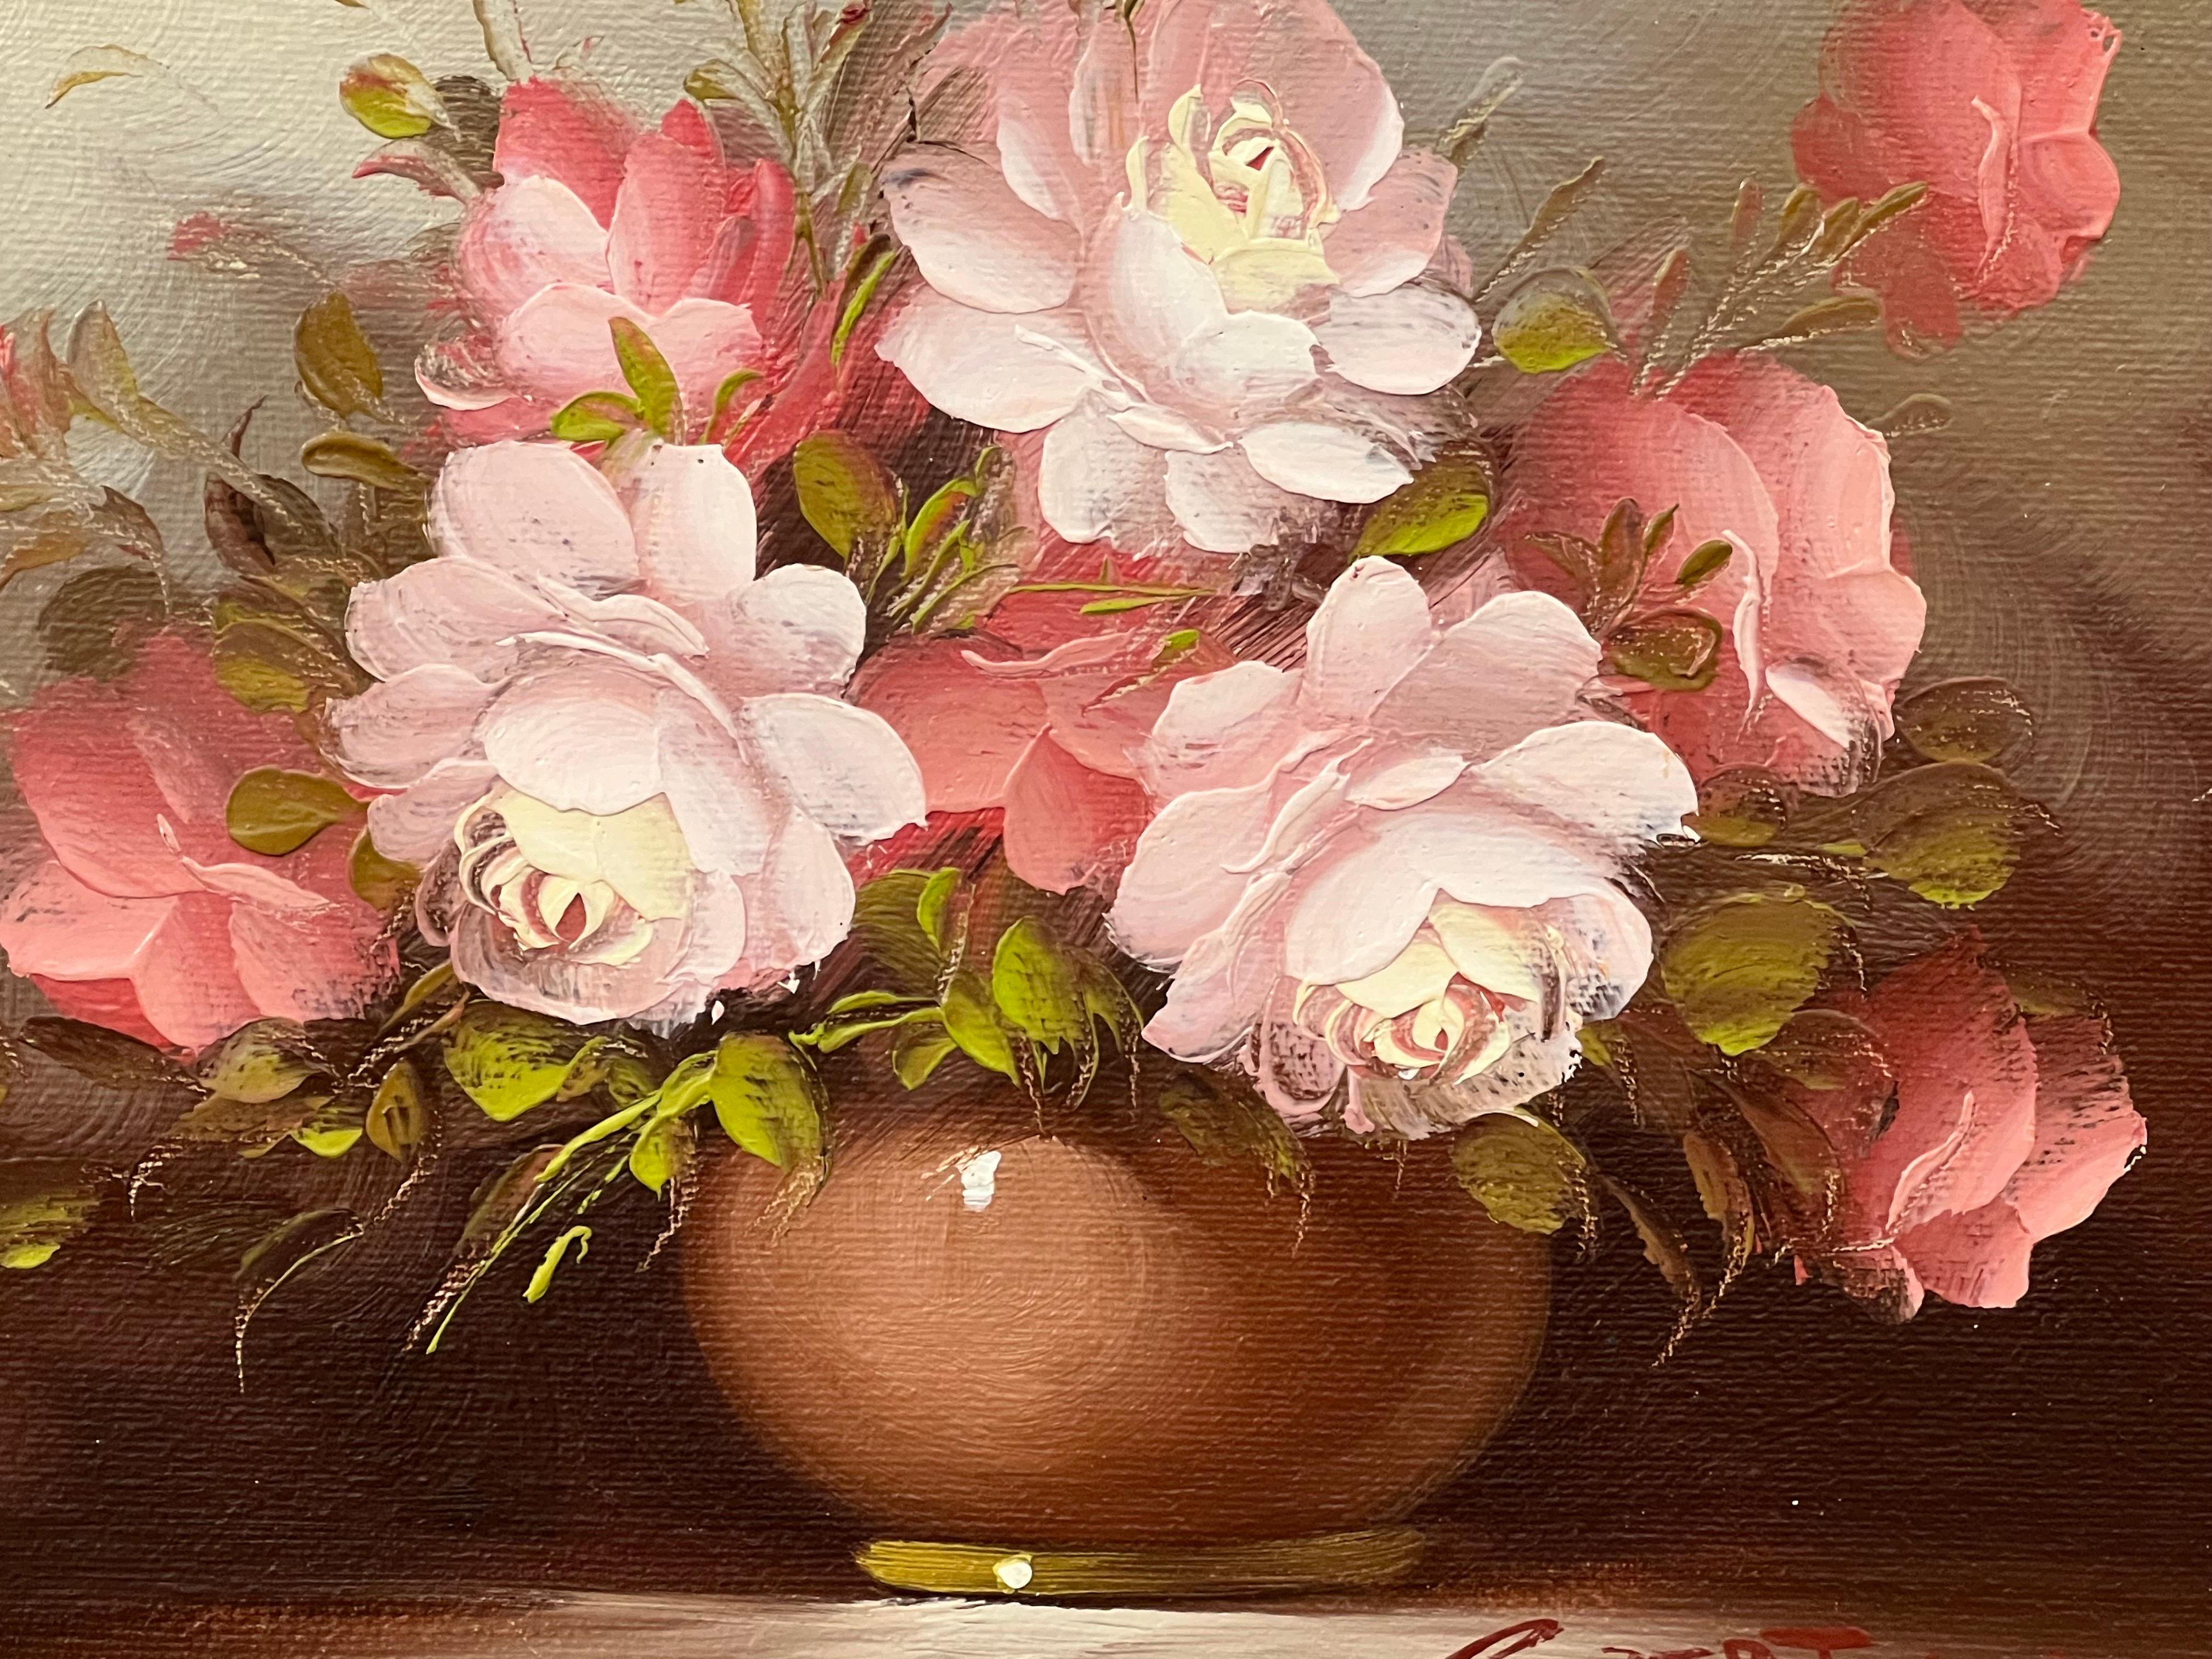 Still Life of a Vase of Pink Red & White Roses by 20th Century American Artist For Sale 1